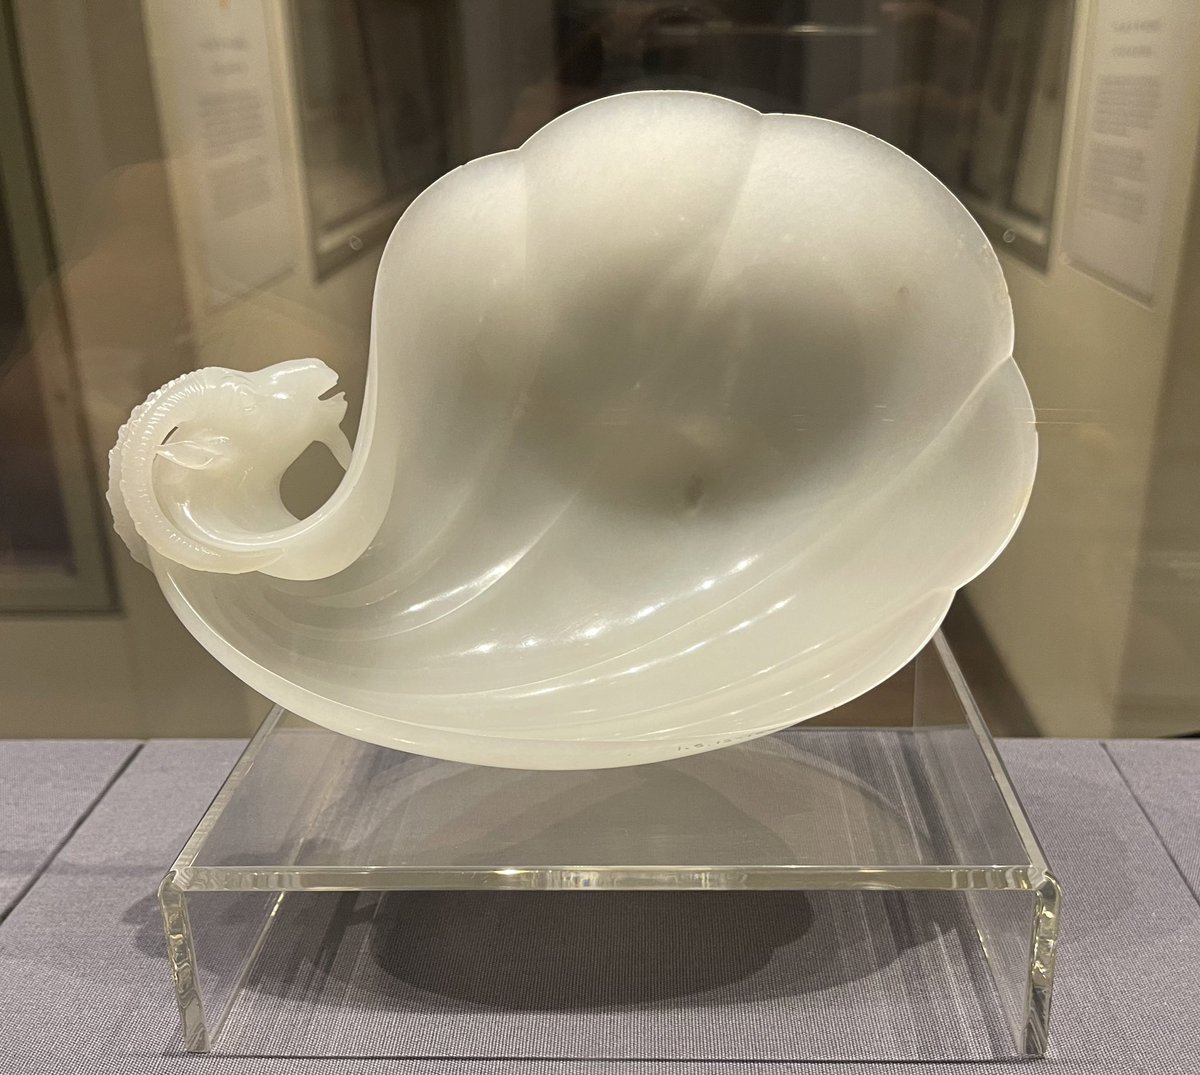 Exquisite craftsmanship. Mughal Emperor Shah Jahan’s wine cup (jade) — crafted in 1657. 
Image from my recent gratifying visit to @V_and_A #art #Mughal #India